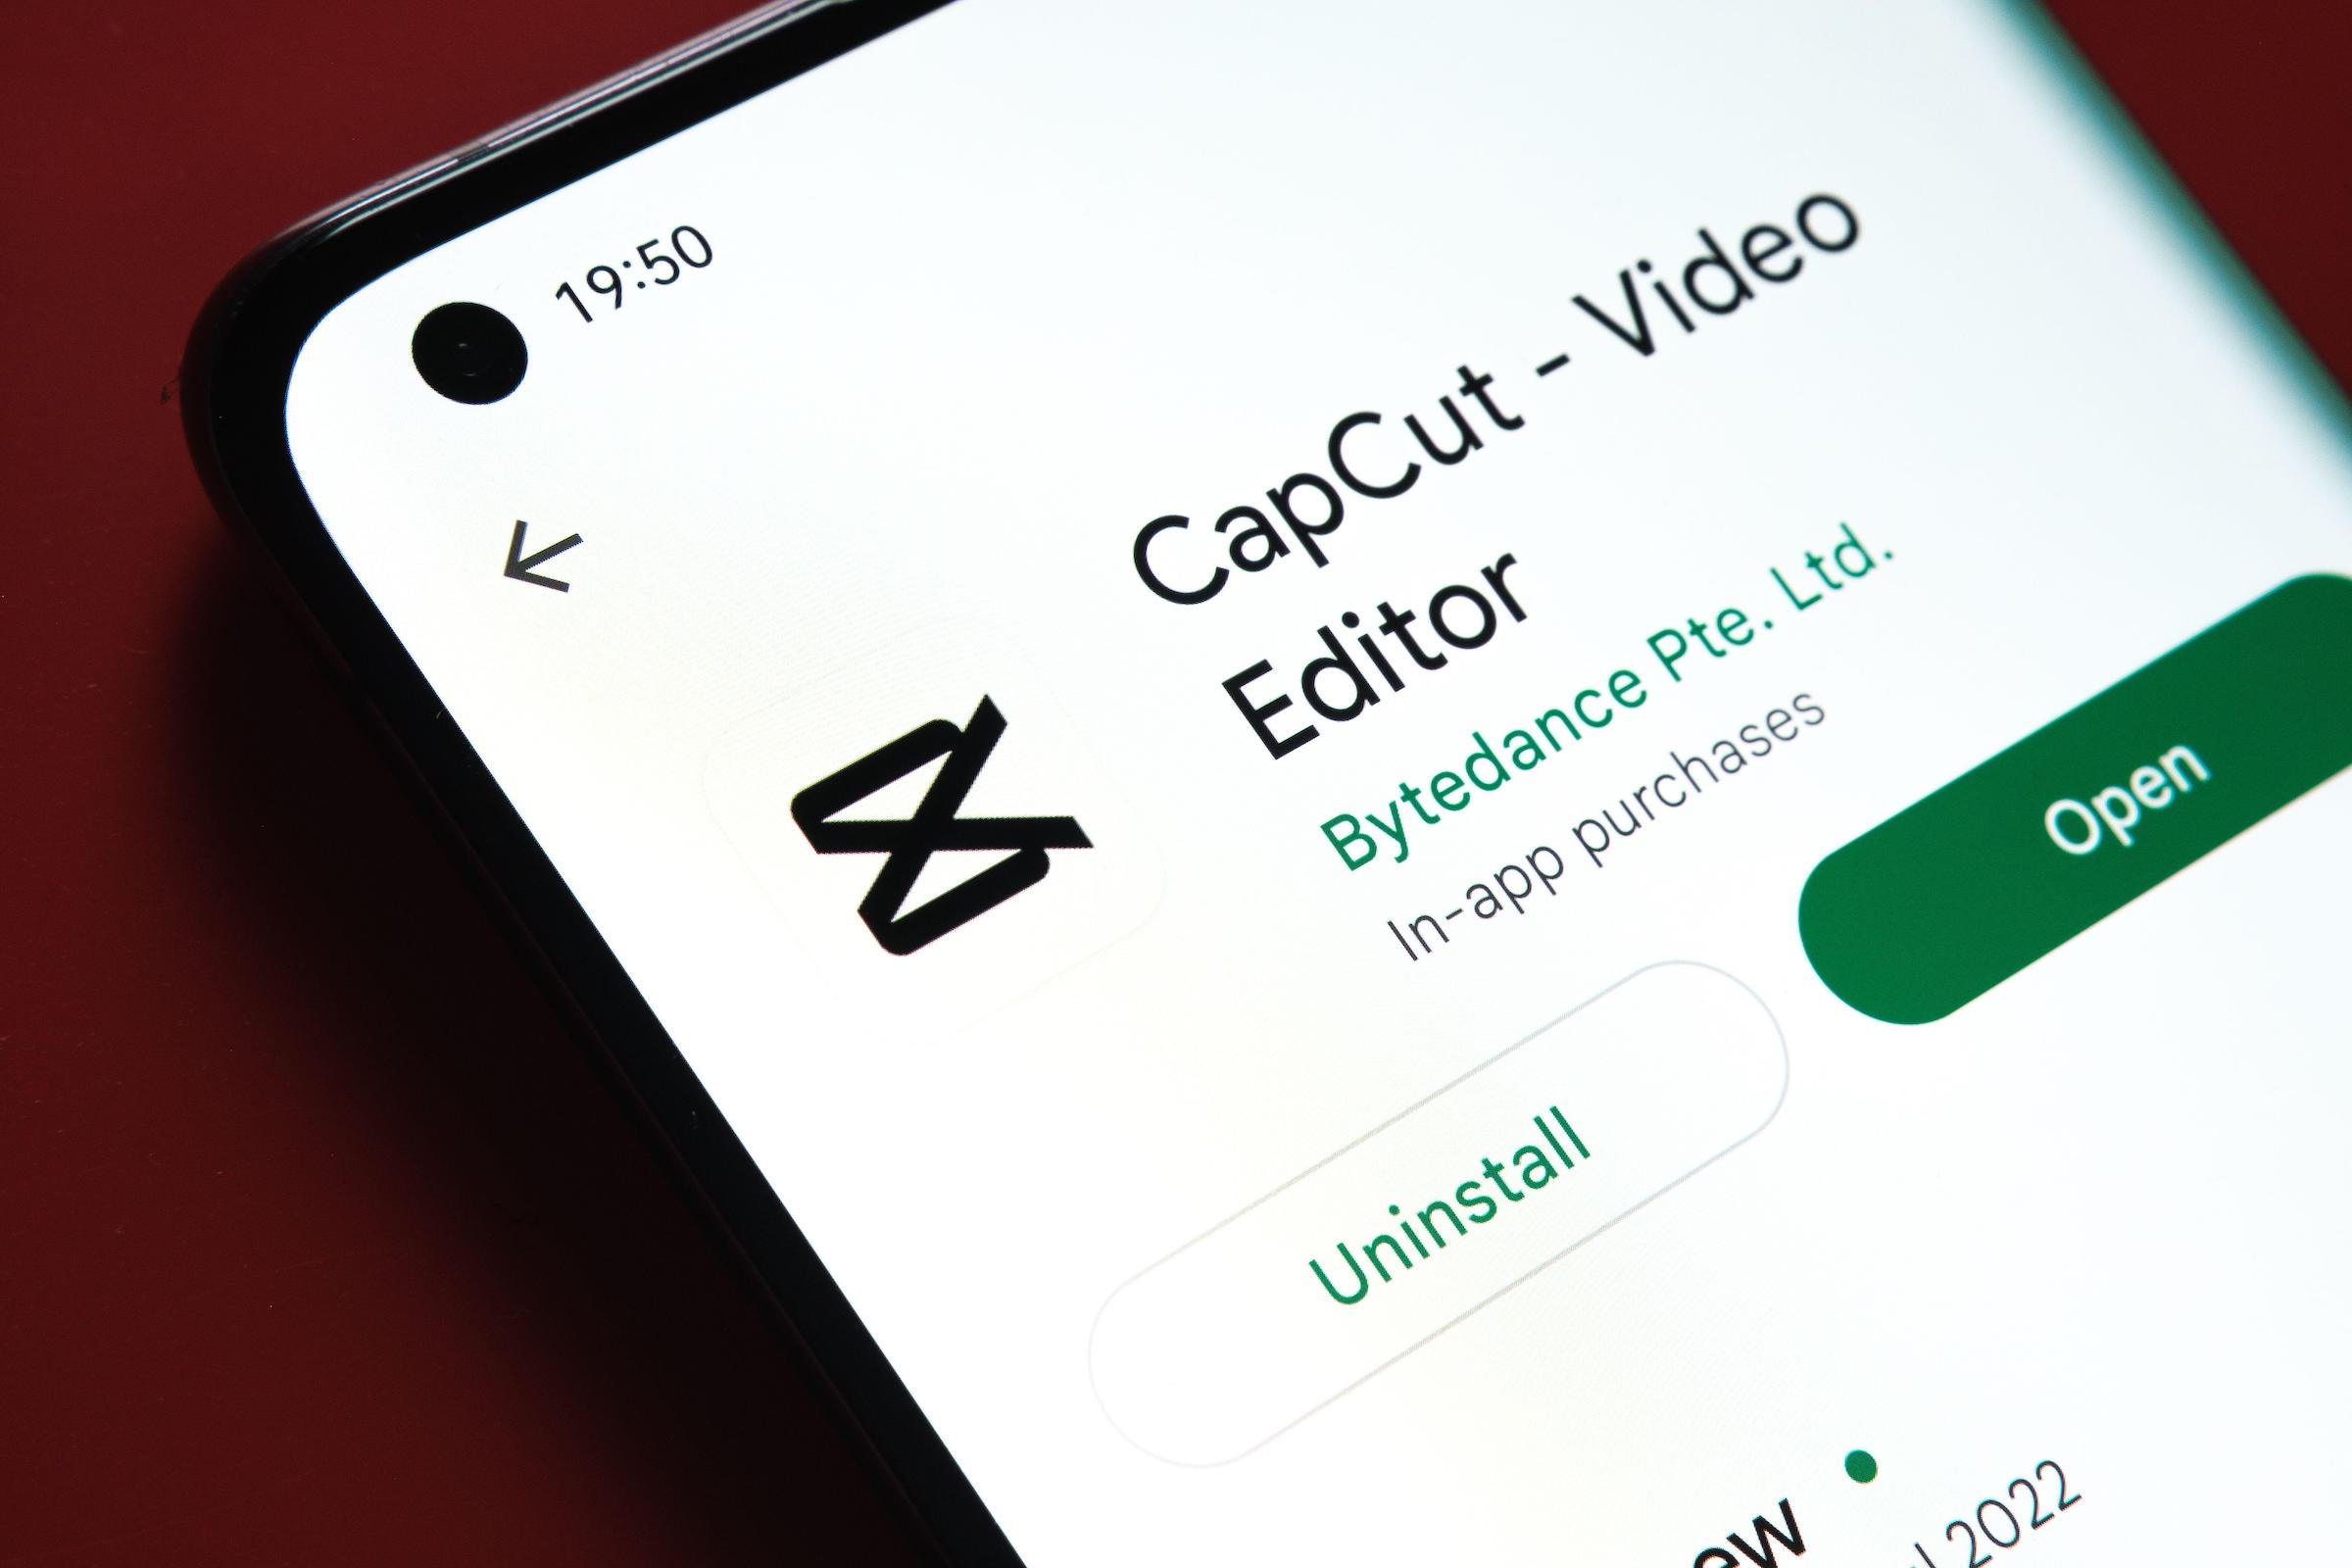 CapCut app on the mobile phone screen, Cap cut is a video editing